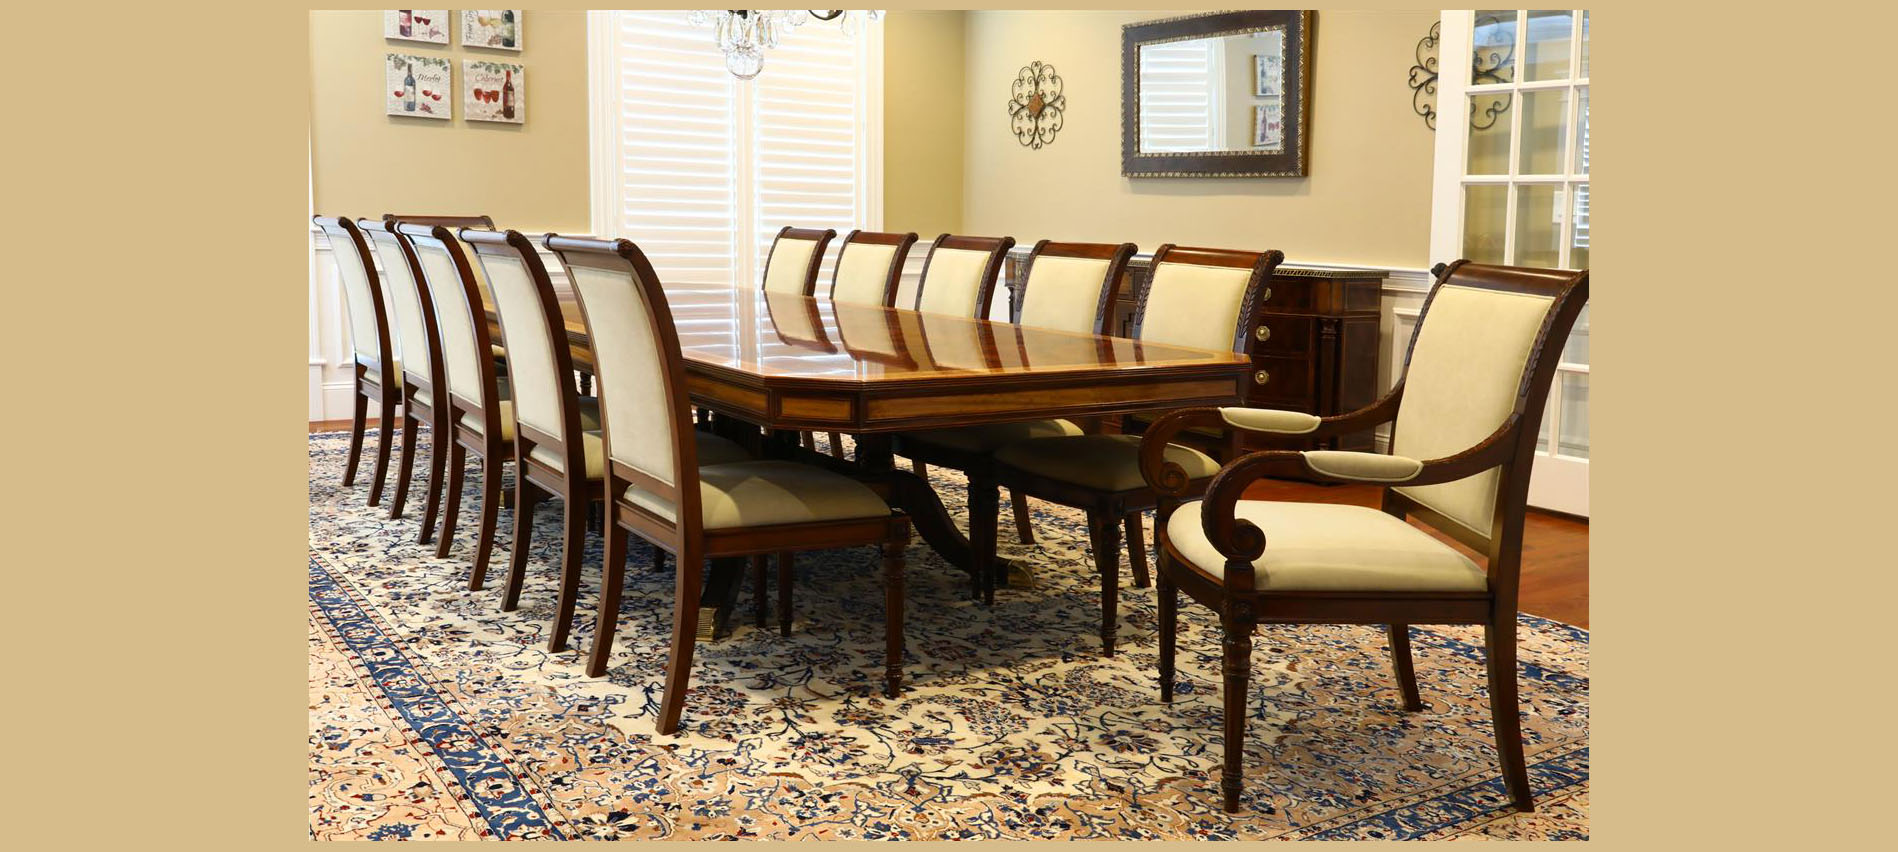 extendable dining table seating 12 persons in a traditional dining room